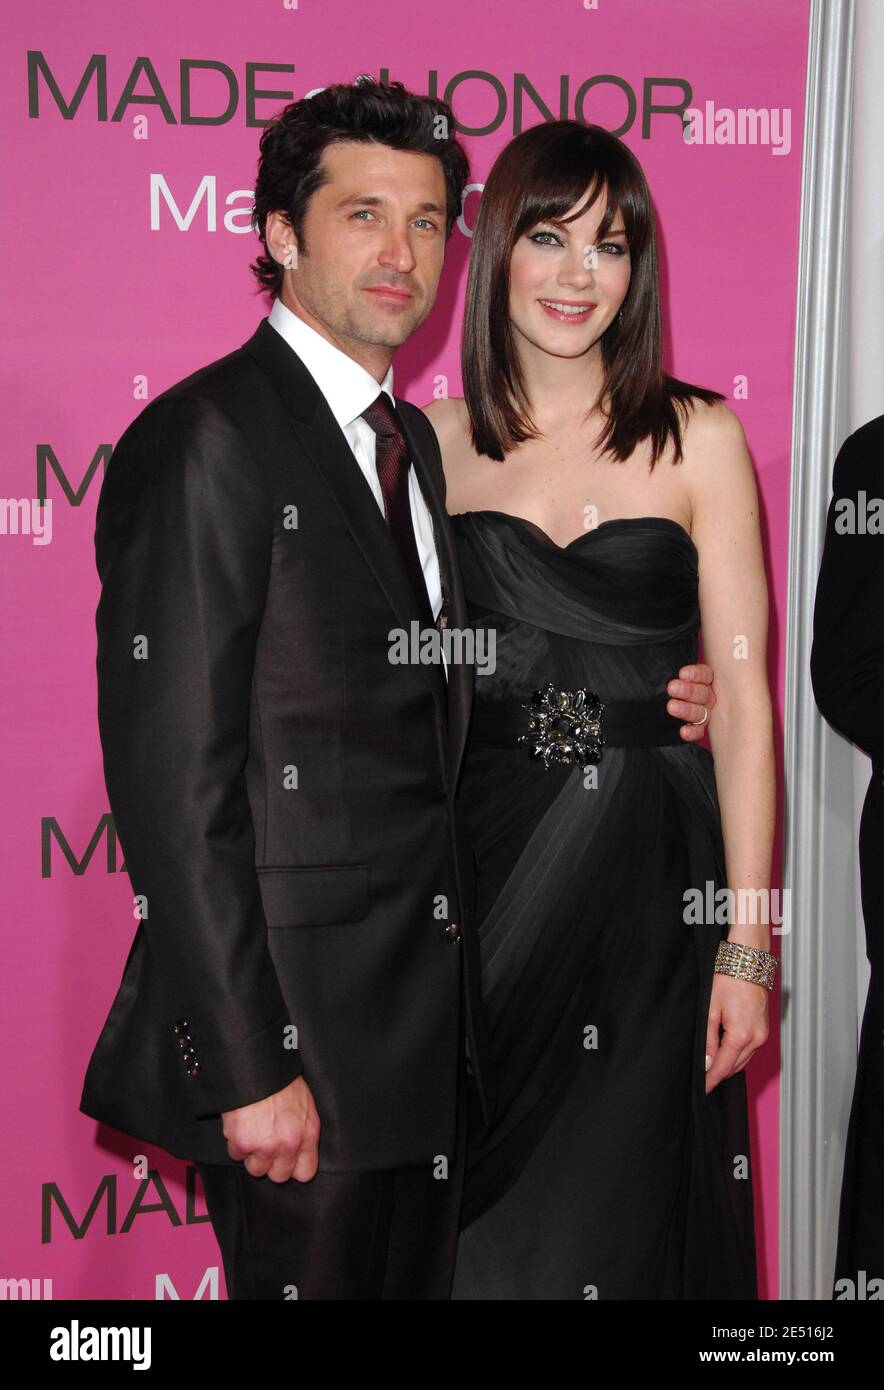 Cast members Patrick Dempsey and Michelle Monaghan arriving for the  premiere of 'Made of Honor' at the Ziegfeld Theater in New York City, NY,  USA on April 28, 2008. Photo by Gregorio